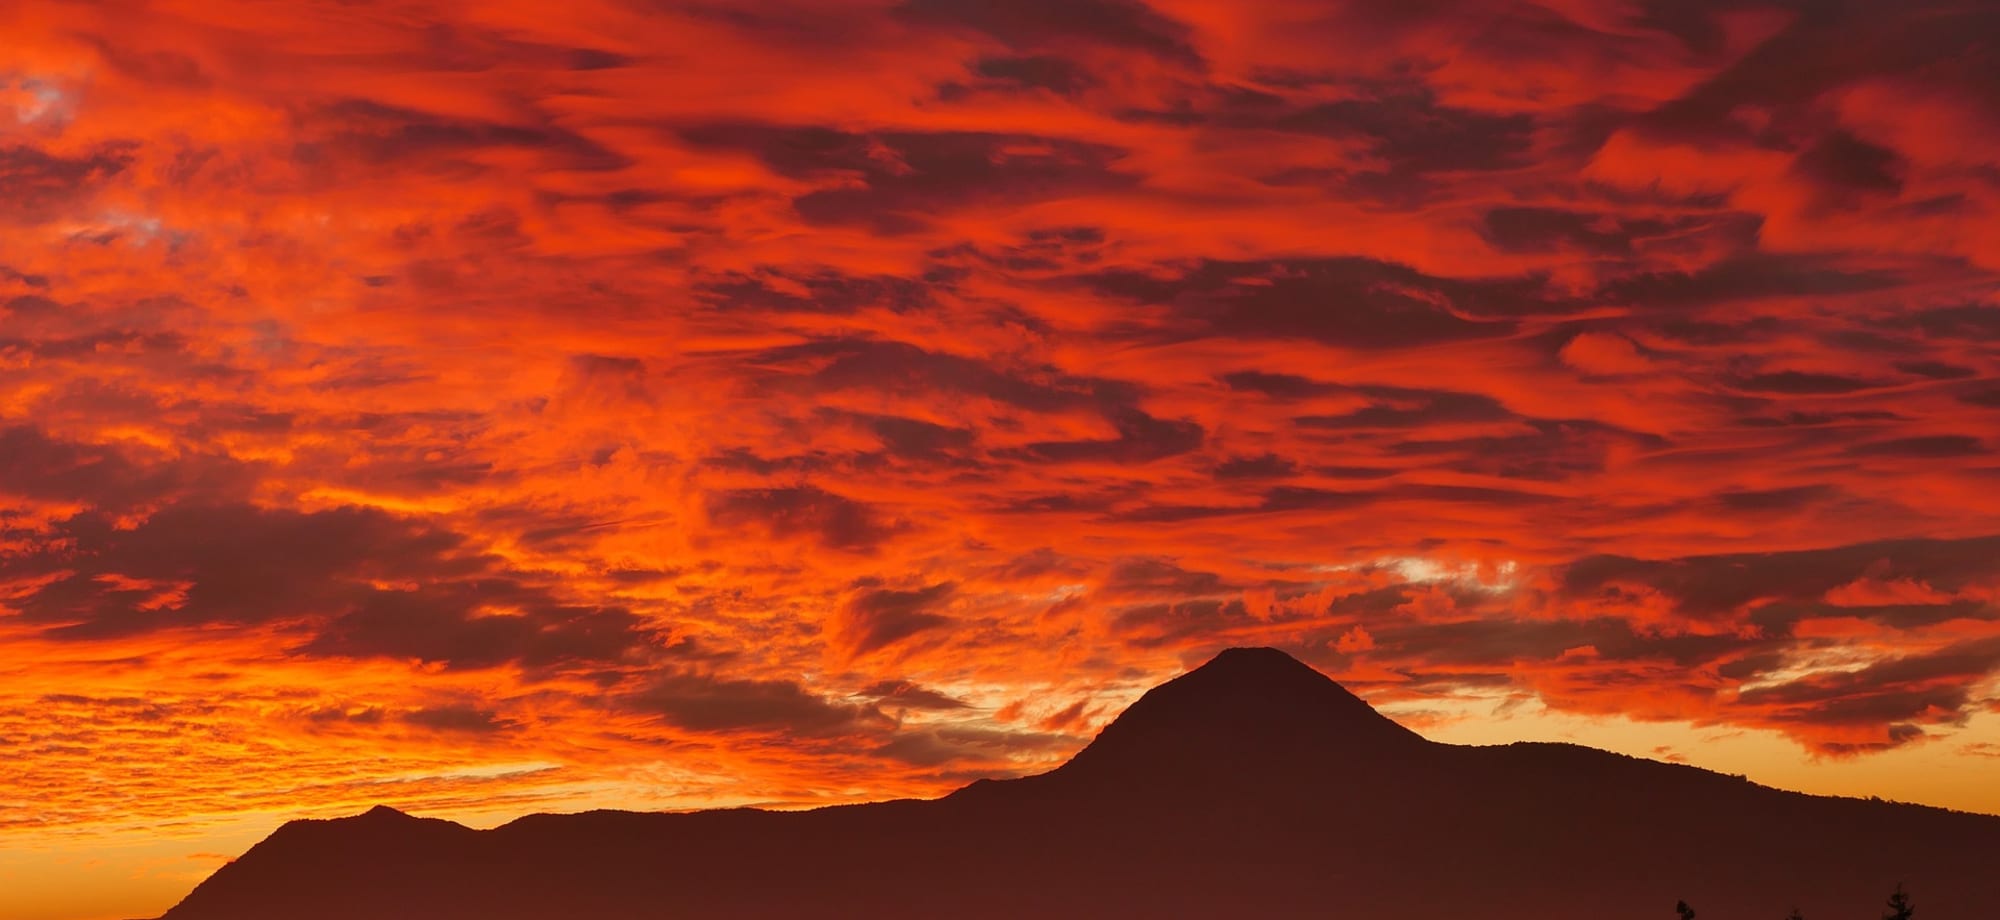 A red sunset over dark mountains. 